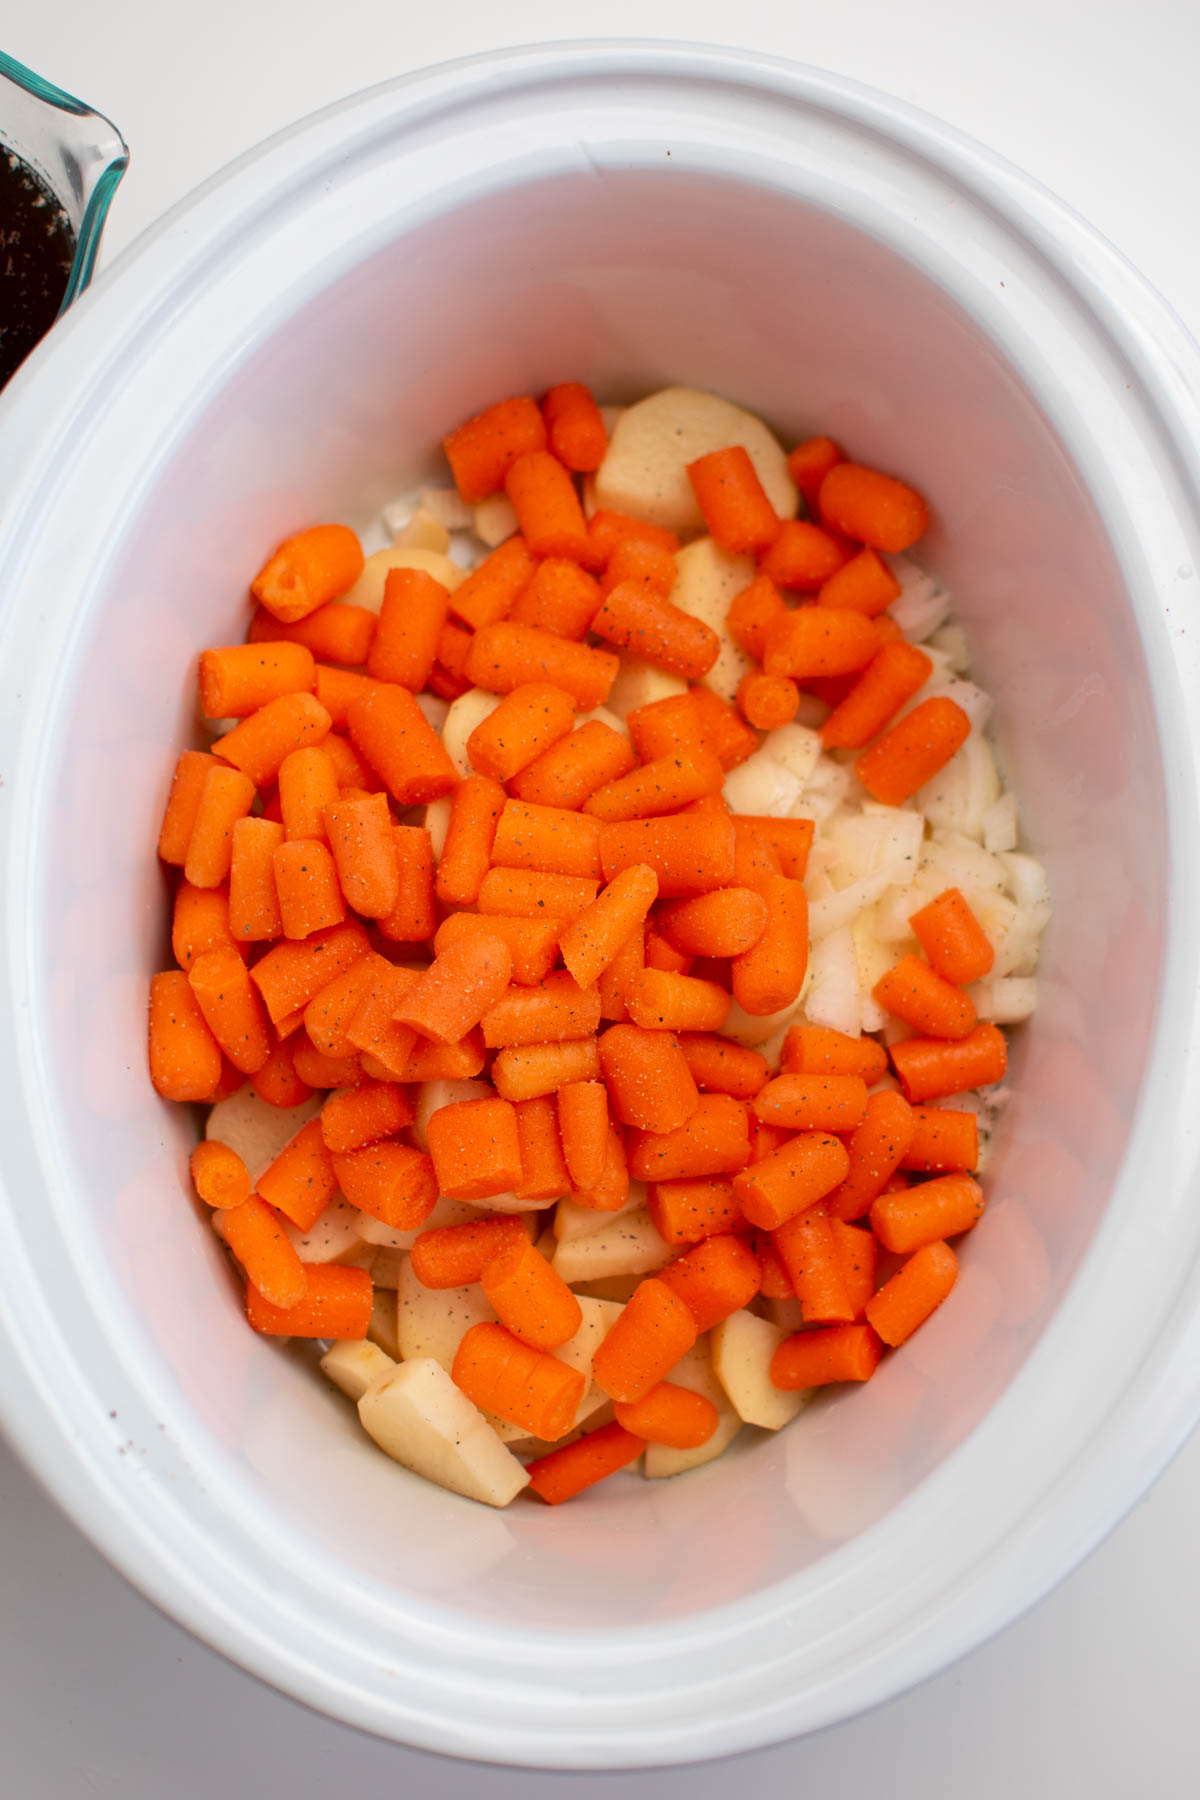 Pieces of raw baby carrots, potatoes, and onion in white Crock Pot insert.